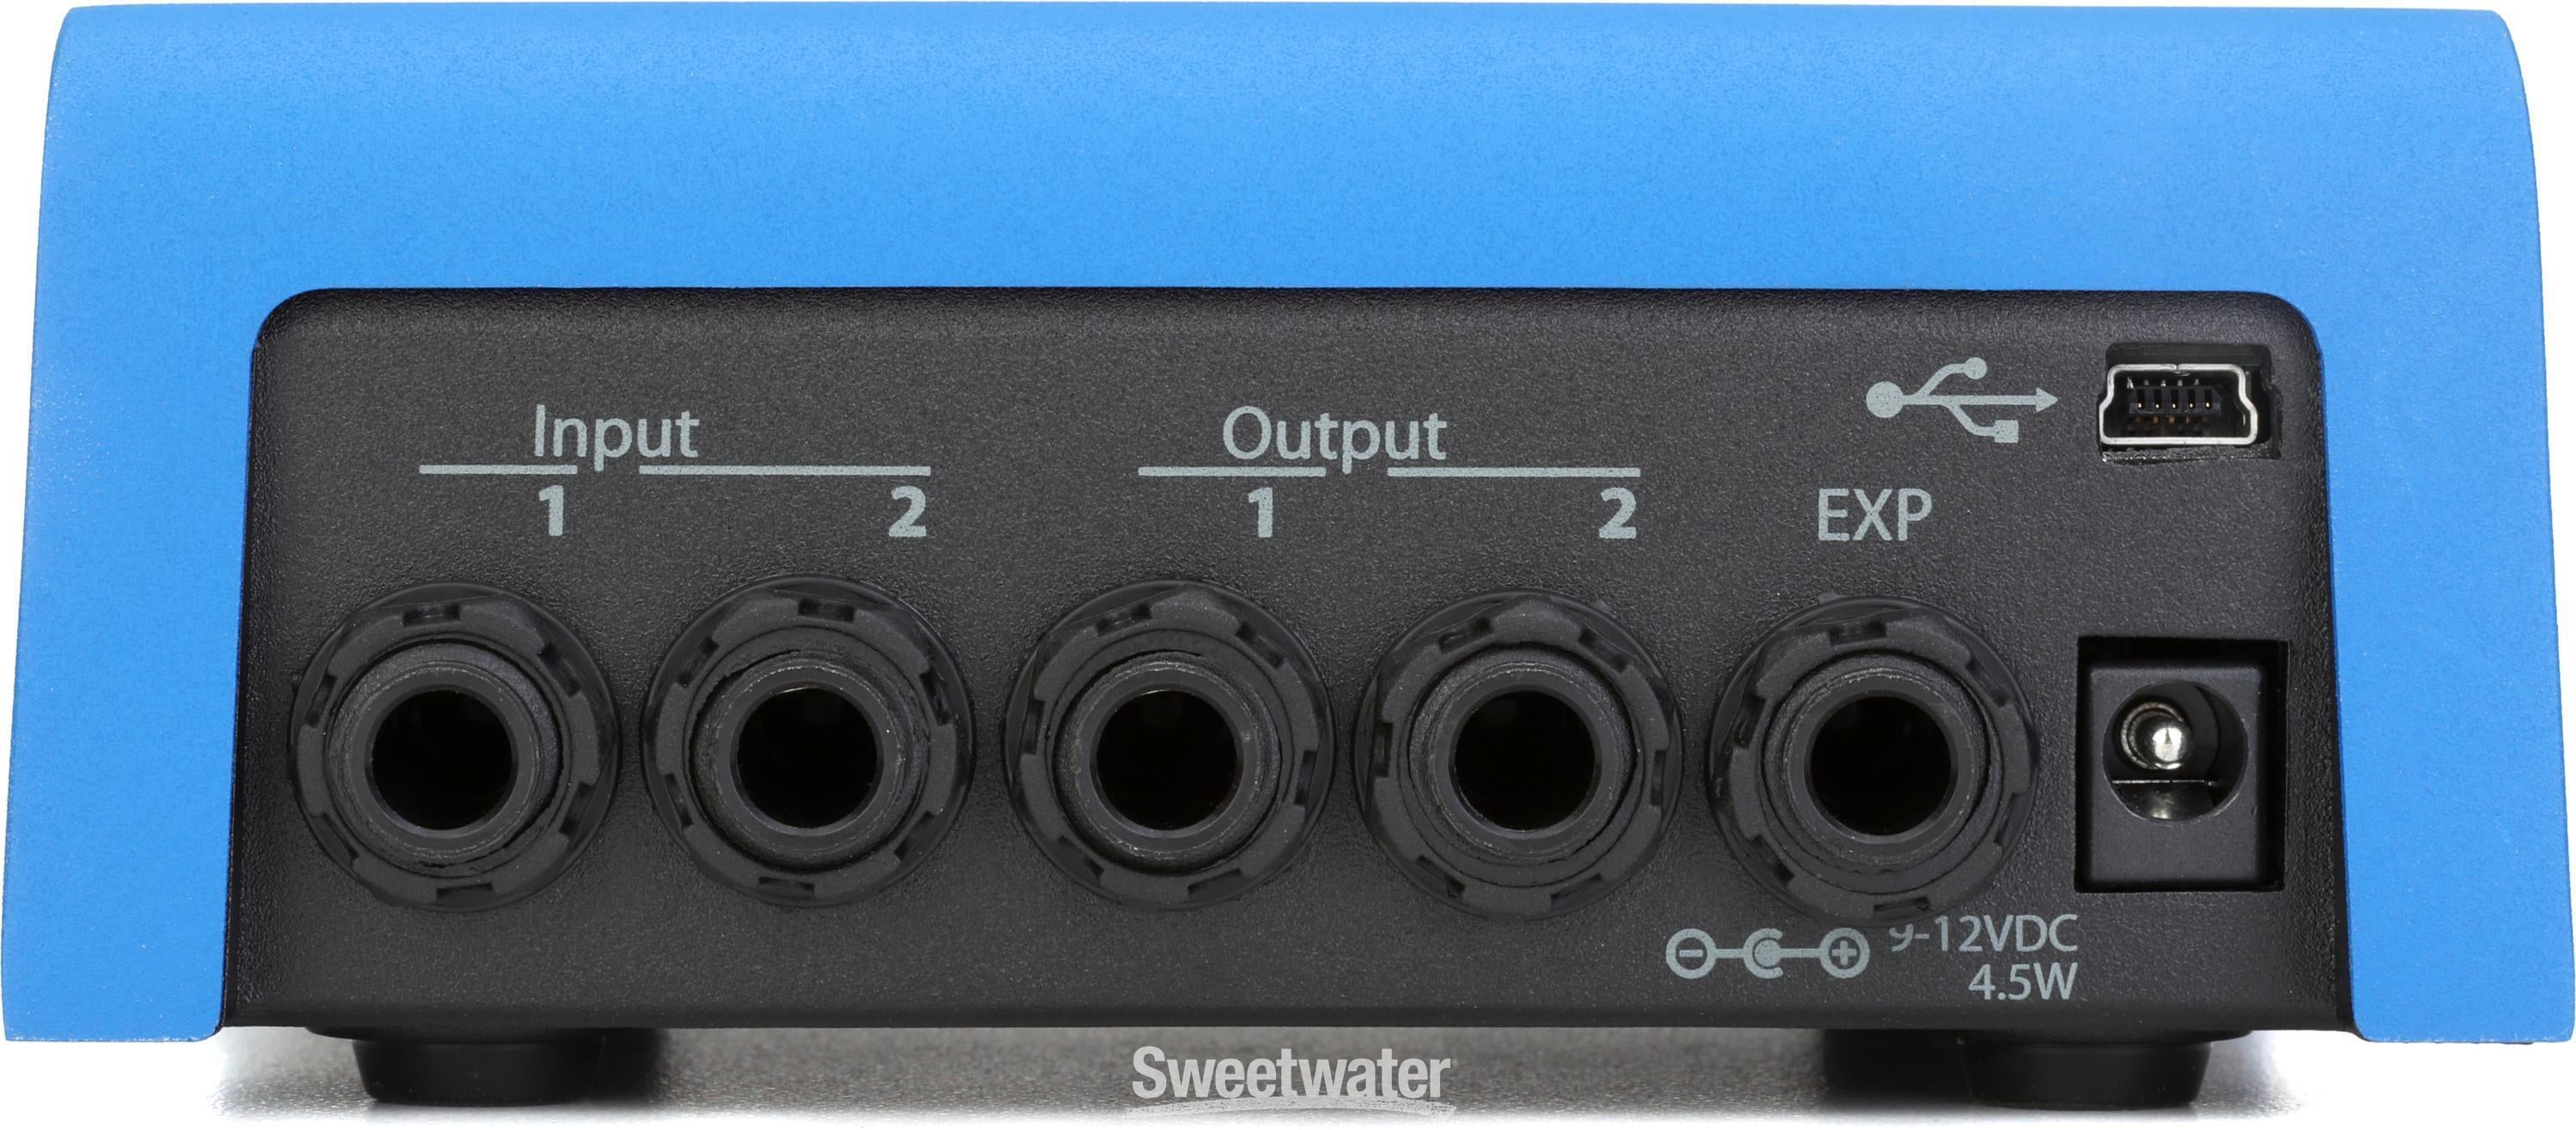 Eventide H9 Max Multi-effects Pedal - Blue | Sweetwater